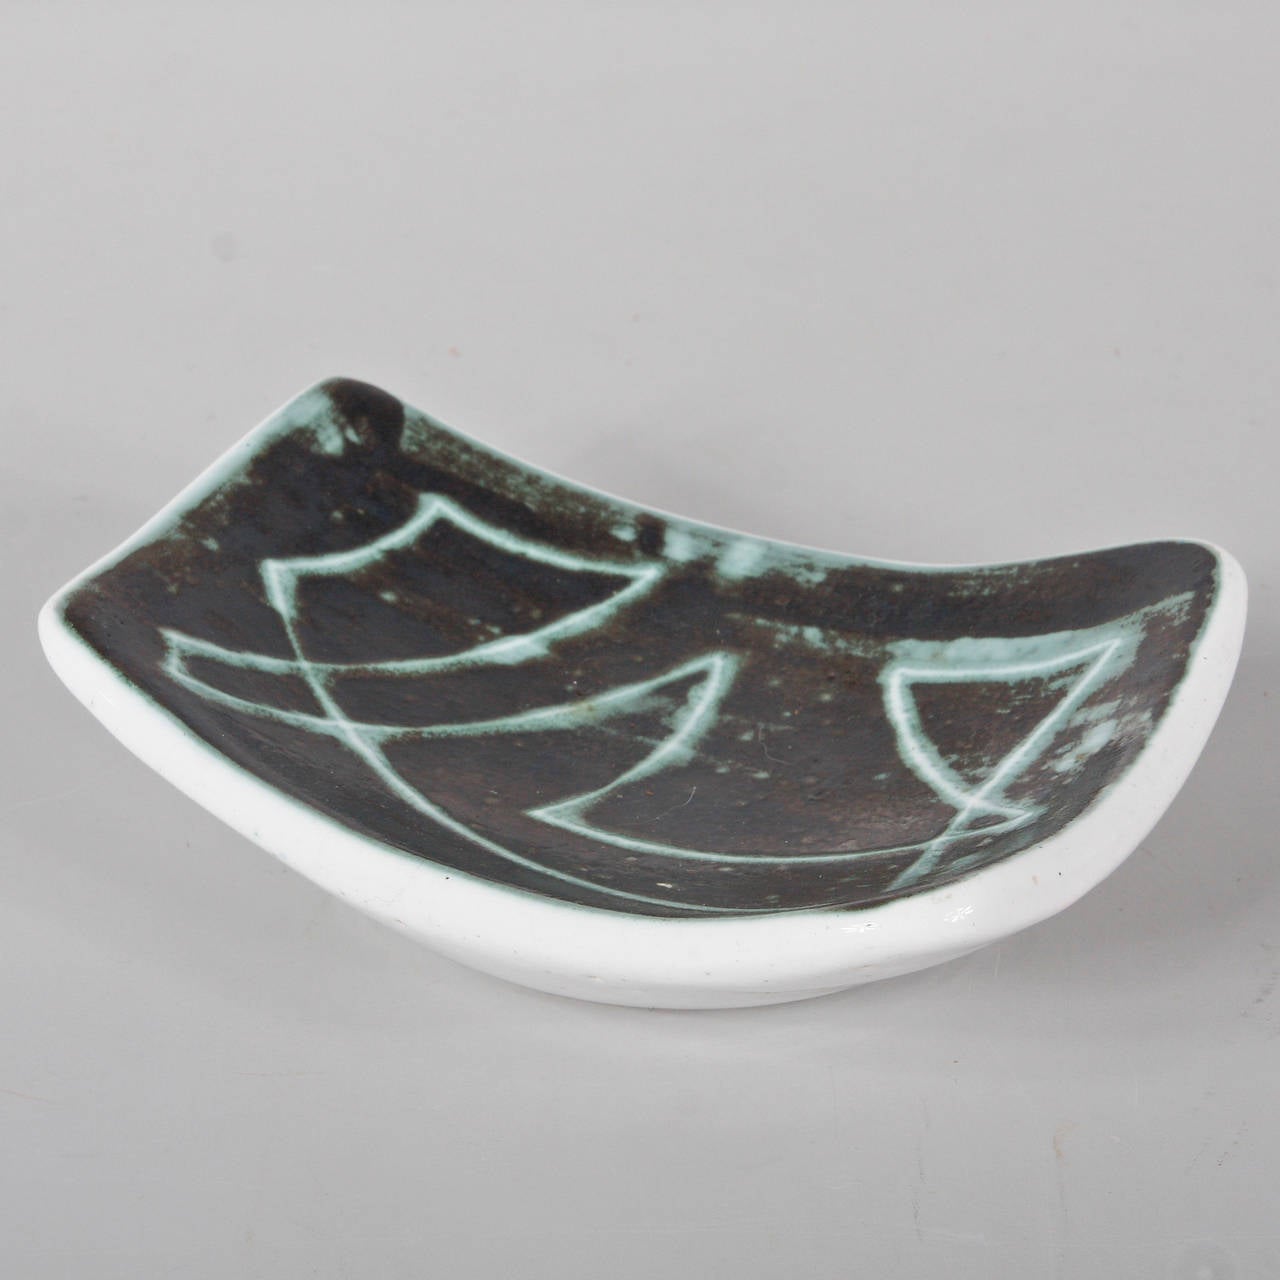 Beautiful ceramic dish glazed in green with an abstract drawing in the manner of Georges Jouve.
Manufactured in France, circa 1960.